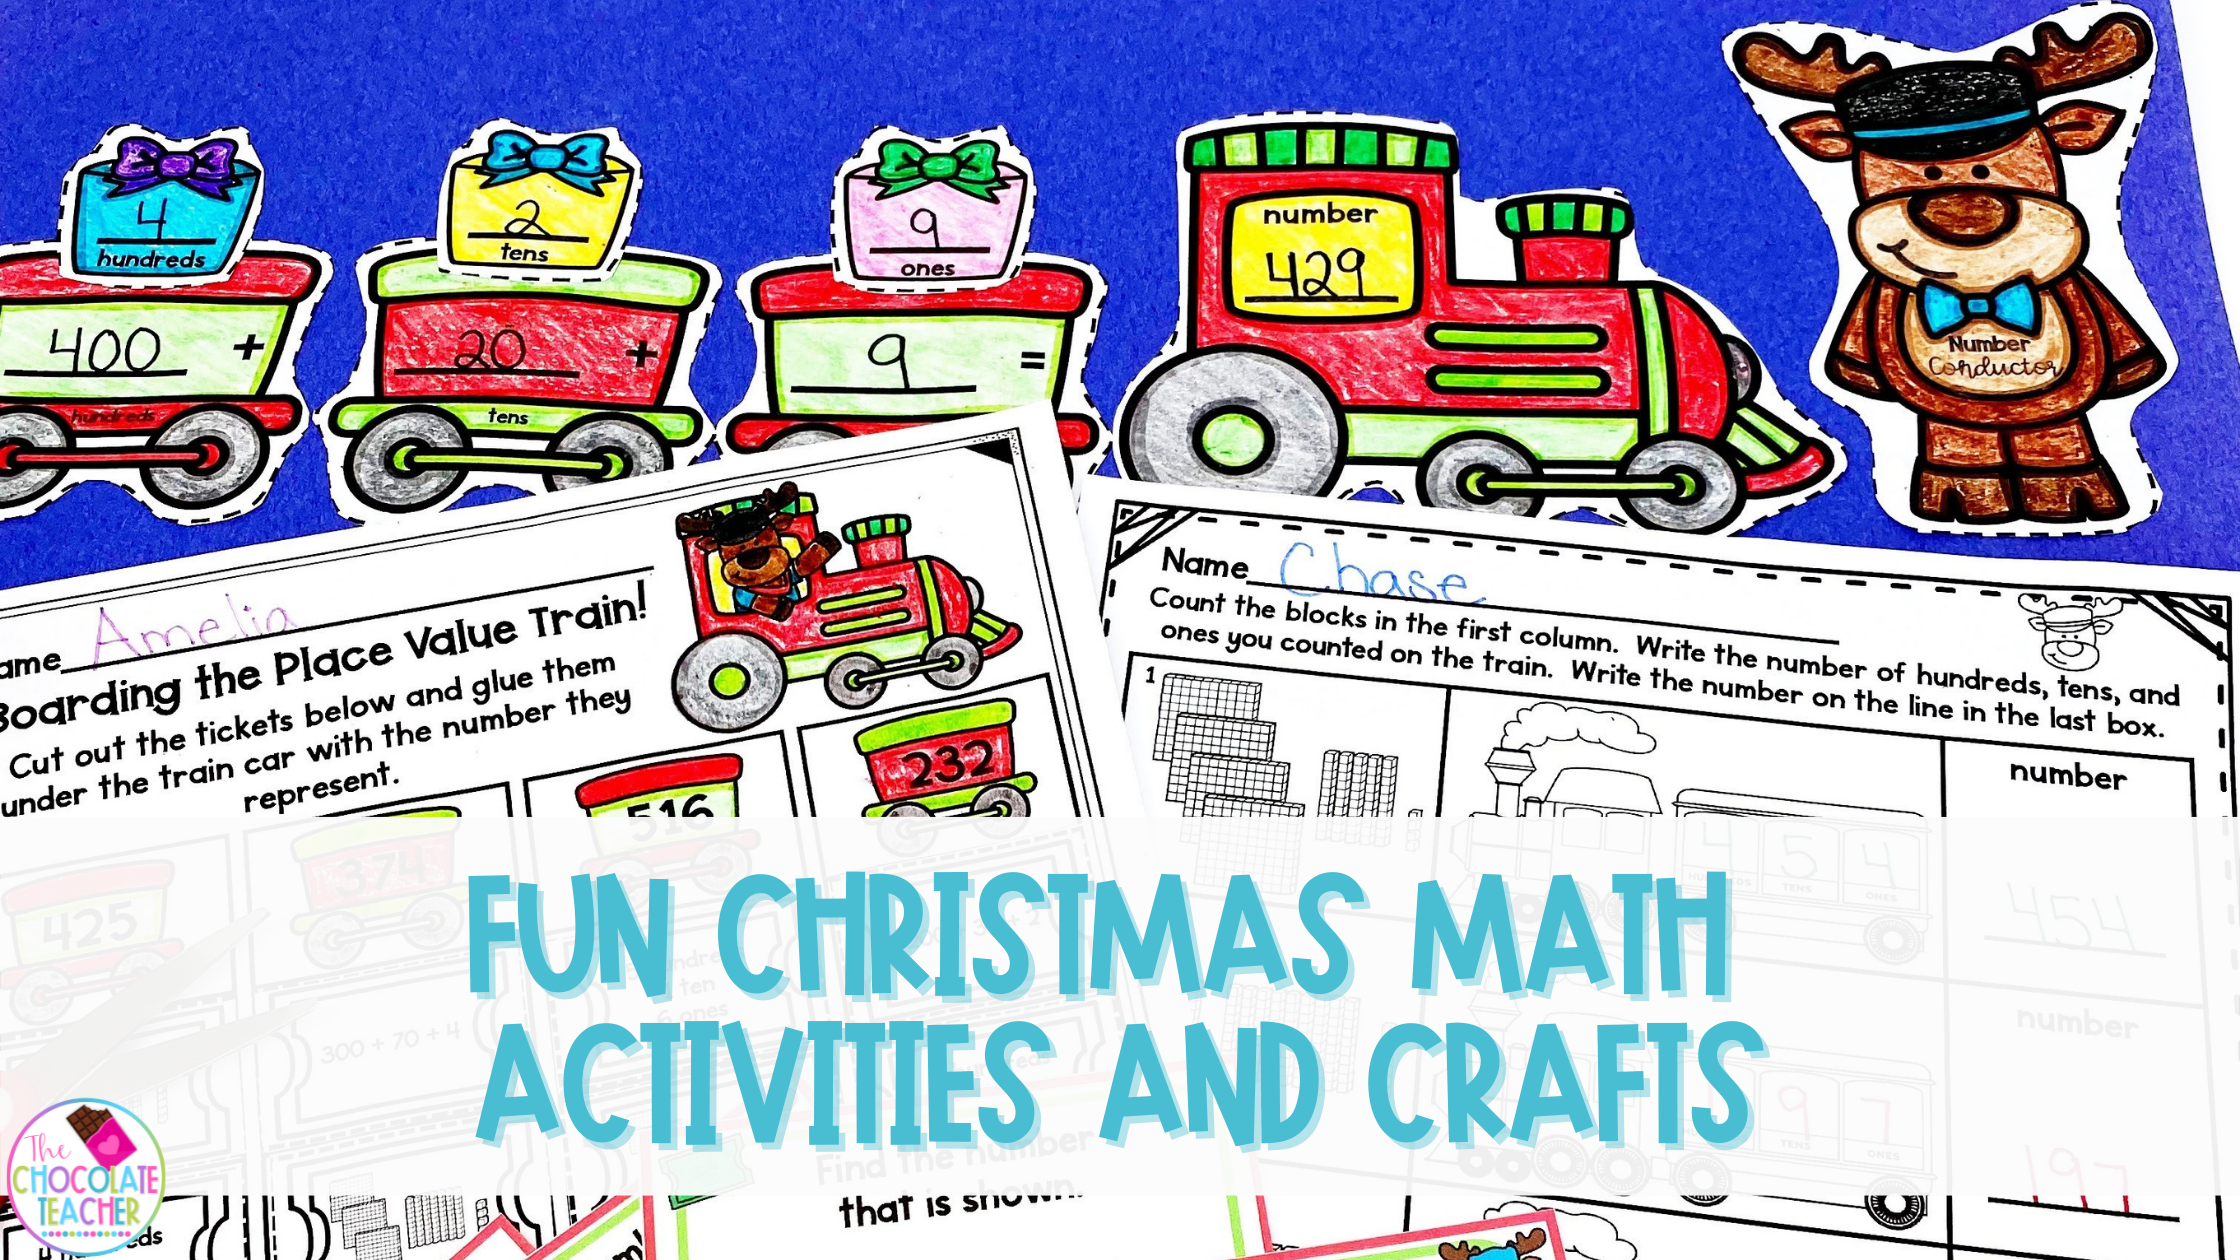 Use these fun and engaging Christmas math activities and crafts in your classroom this winter.